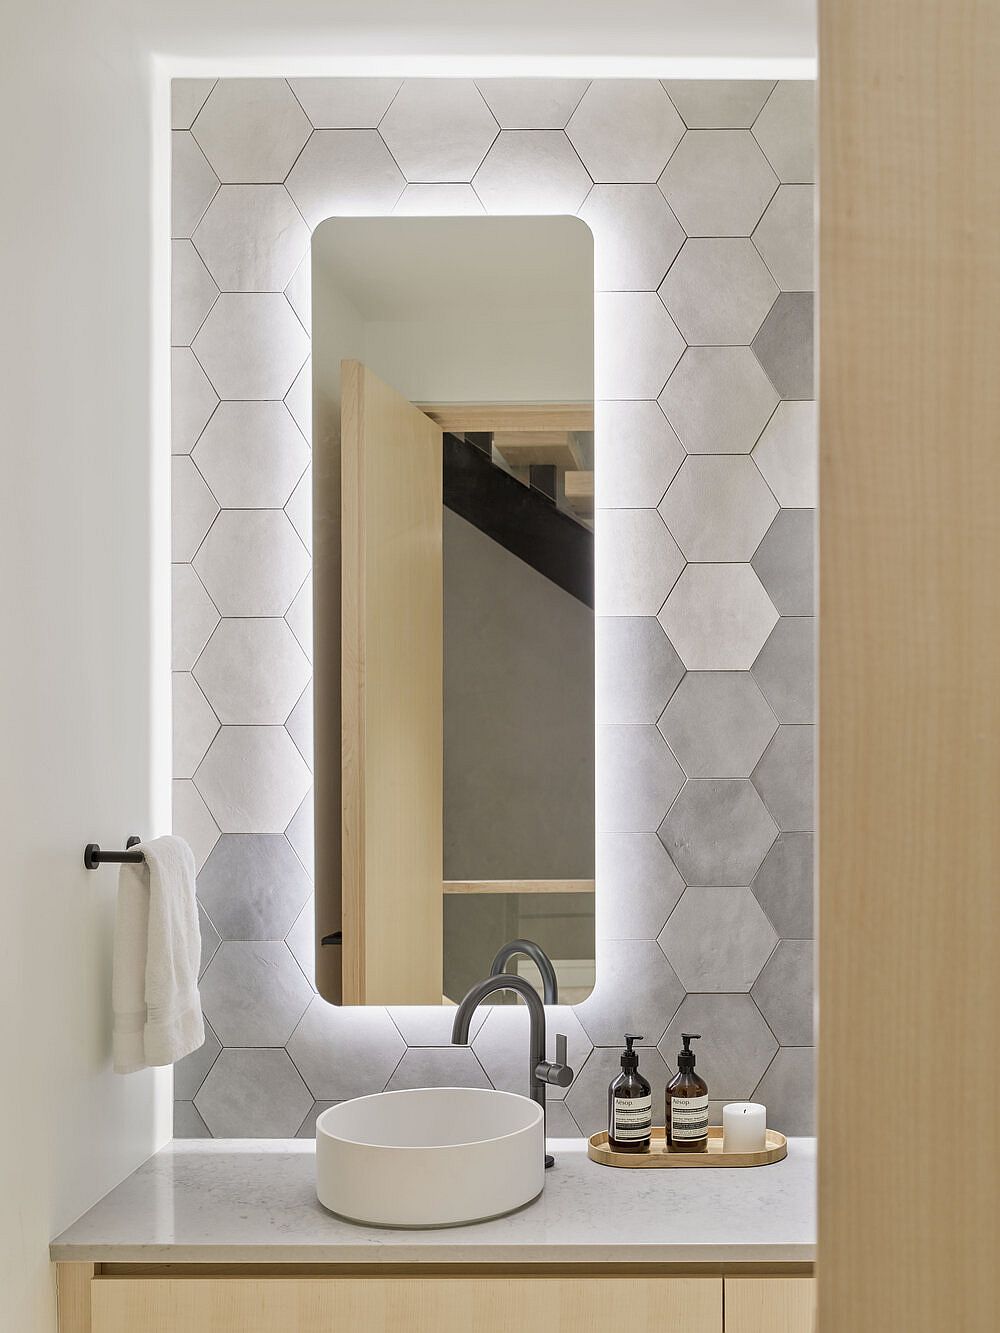 Gray-hexagonal-wall-tiles-bring-a-dash-of-visual-and-geometric-contrast-to-the-modern-wood-and-white-bathroom-37909